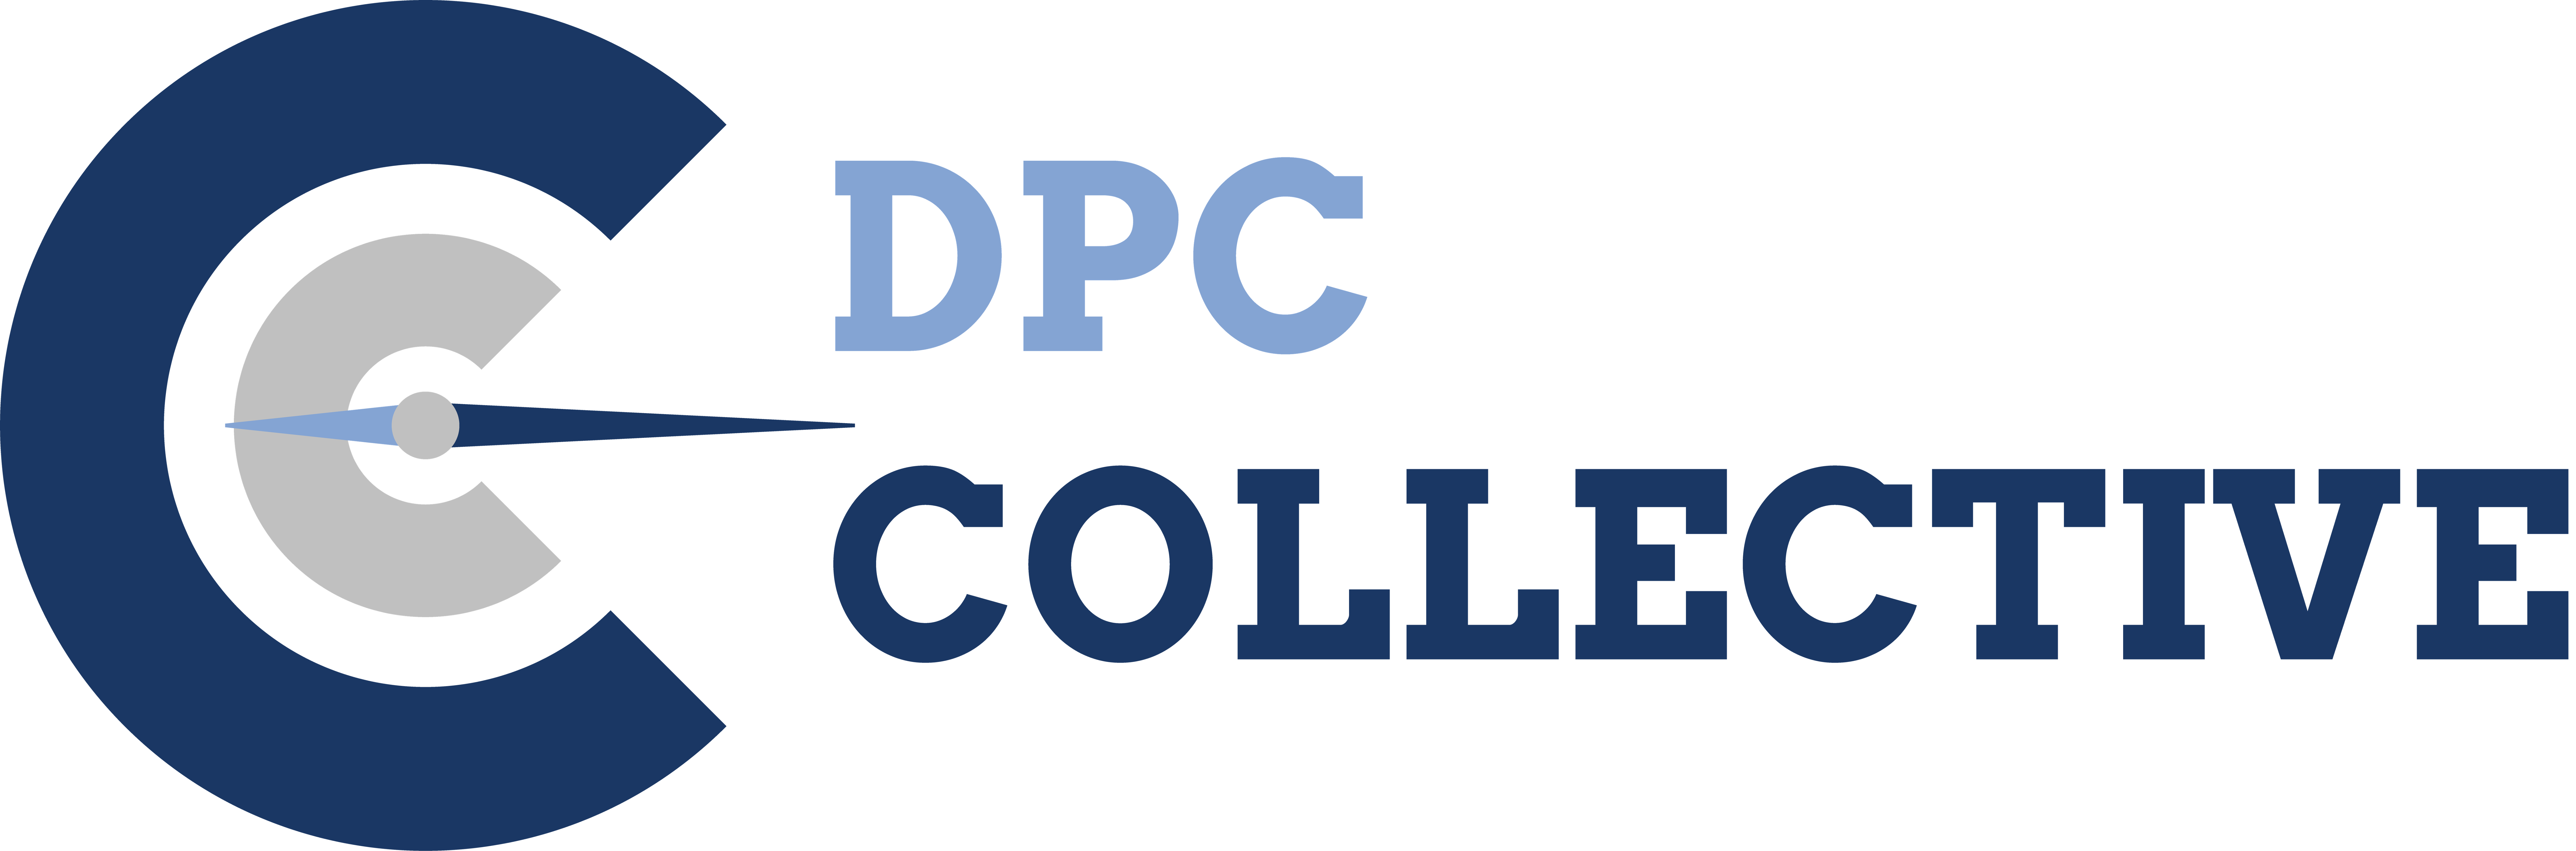 dpc_collective_3_combined